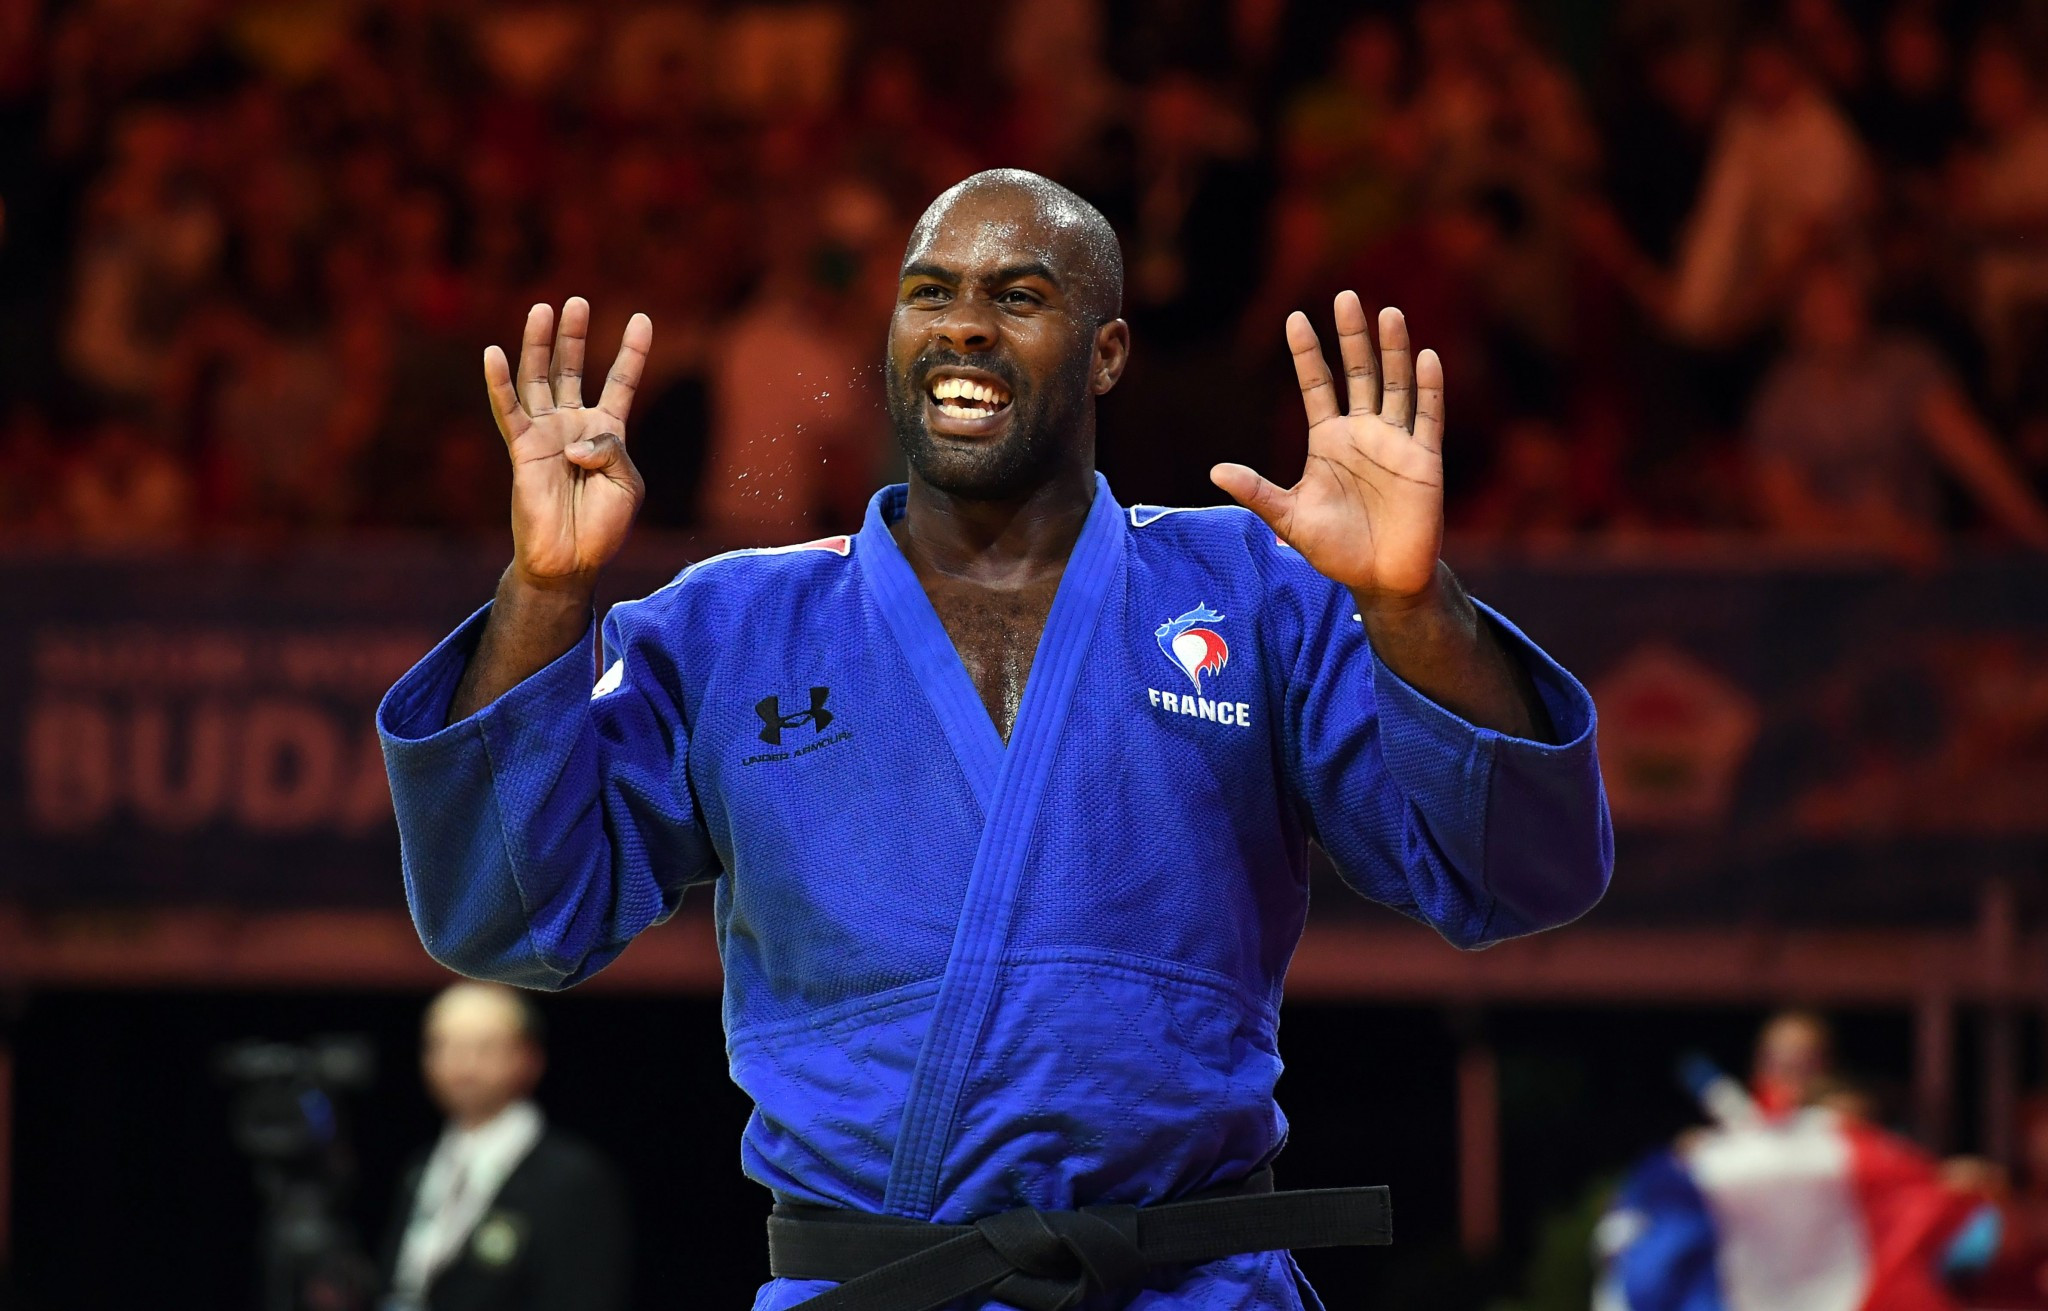 Teddy Riner was the star of the show on the last day of individual competition at the IJF World Championships